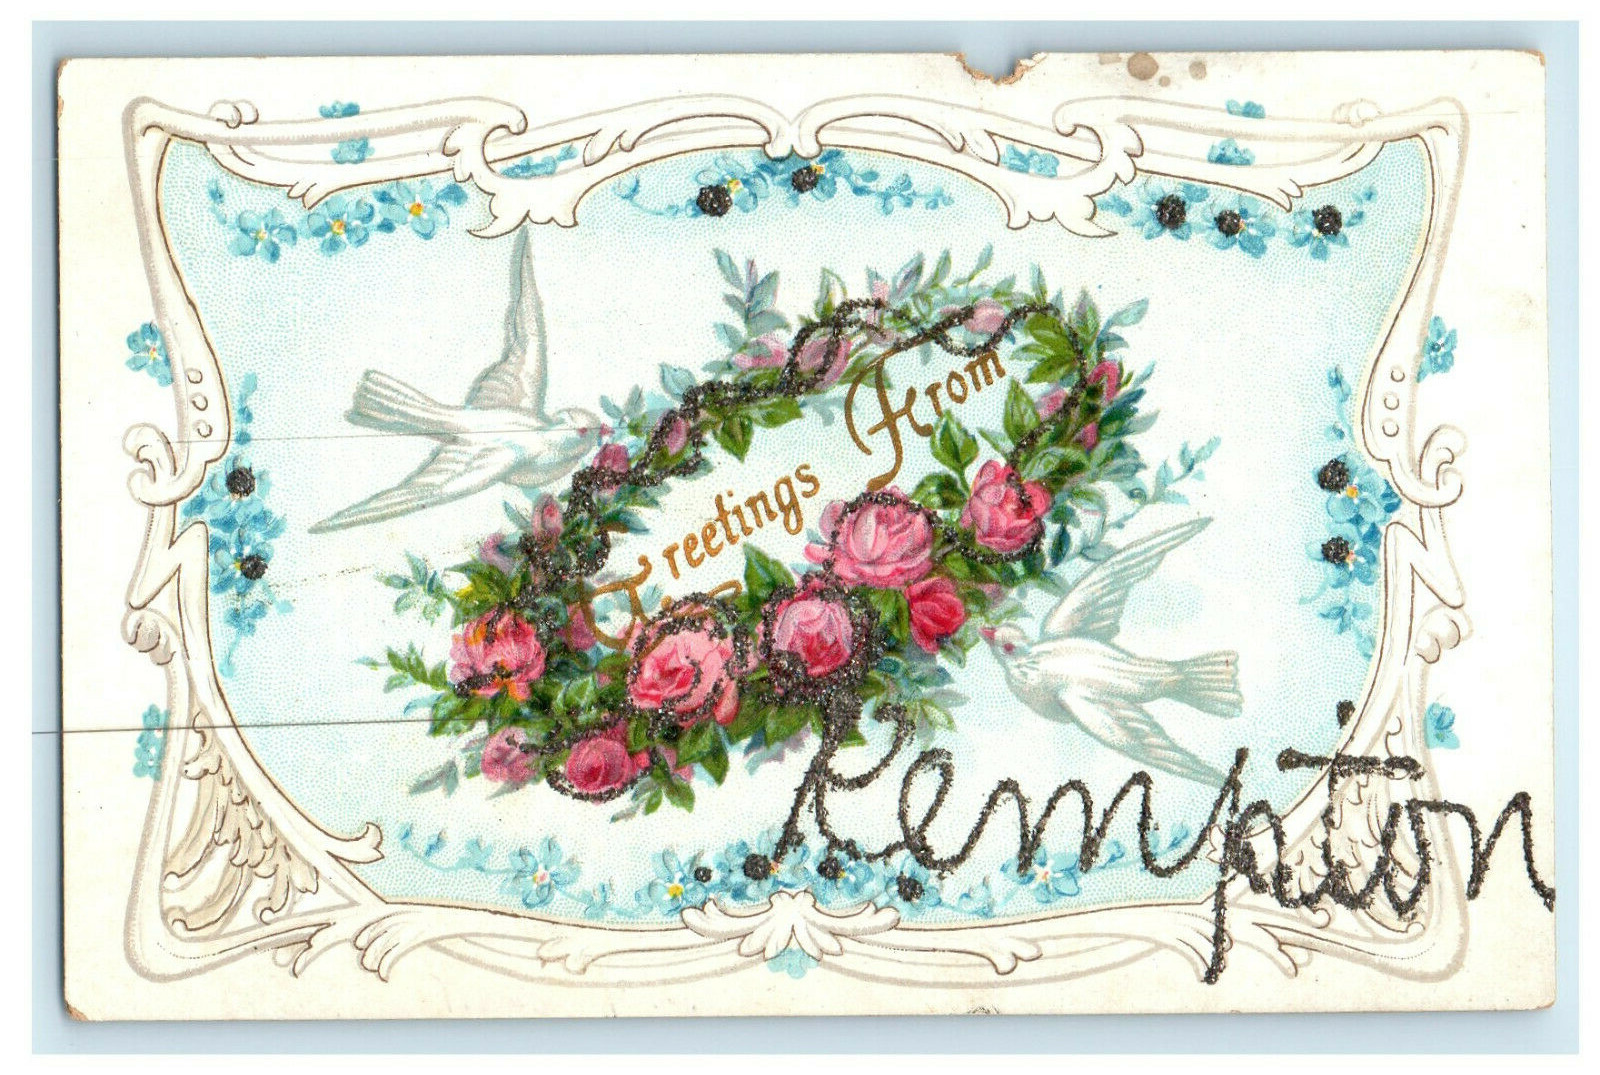 c1910s Flowers, Doves, Glitters, Greetings from Kempton Illinois IL Postcard